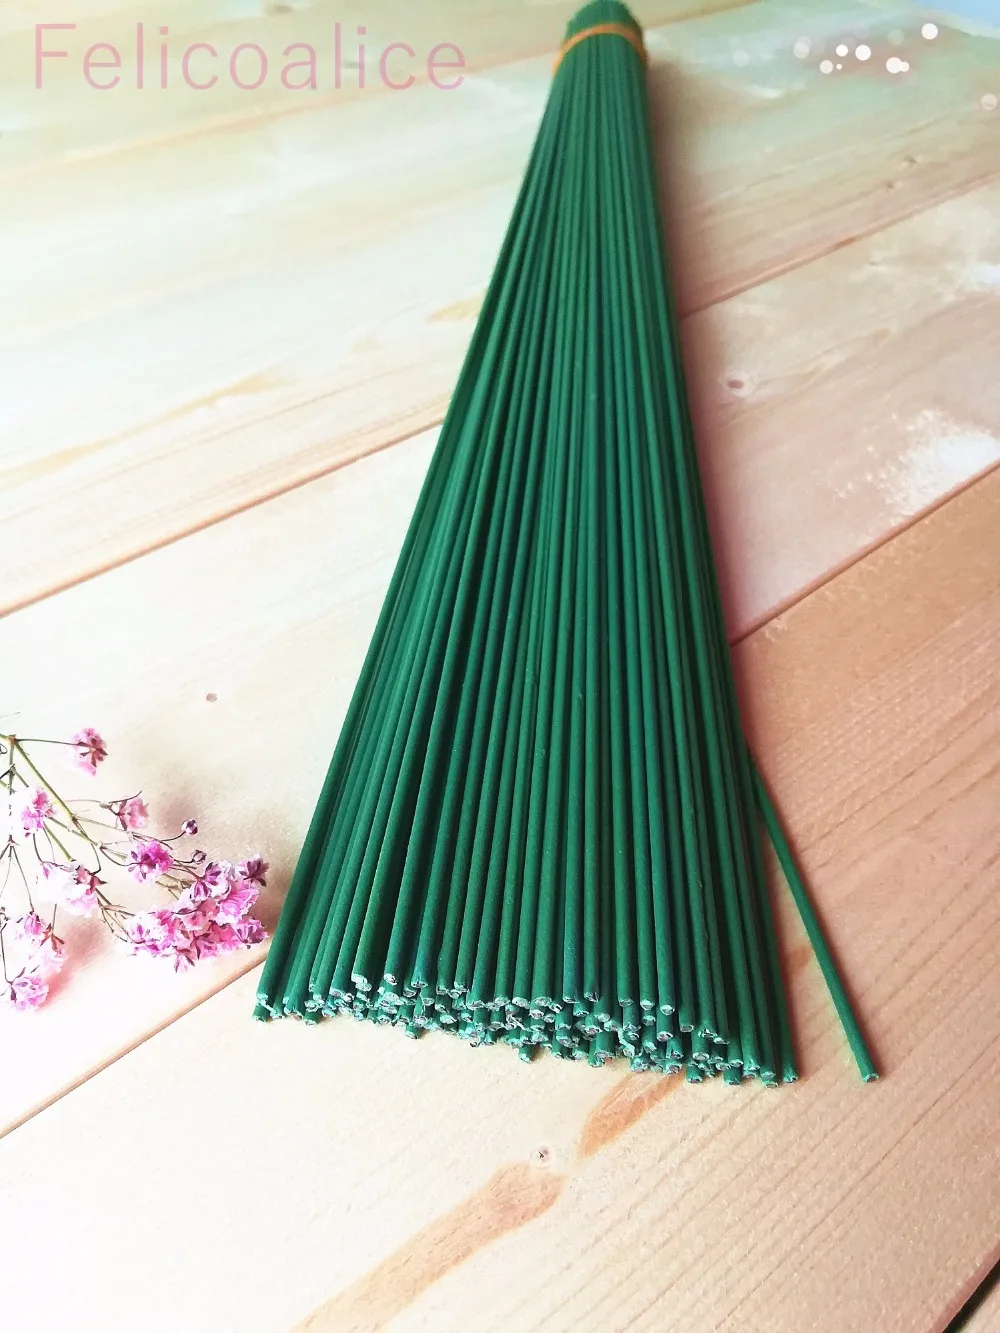 50pcs 40cm Long Artificial Flower Wire Paper Covered Craft Stocking Stem Floral 